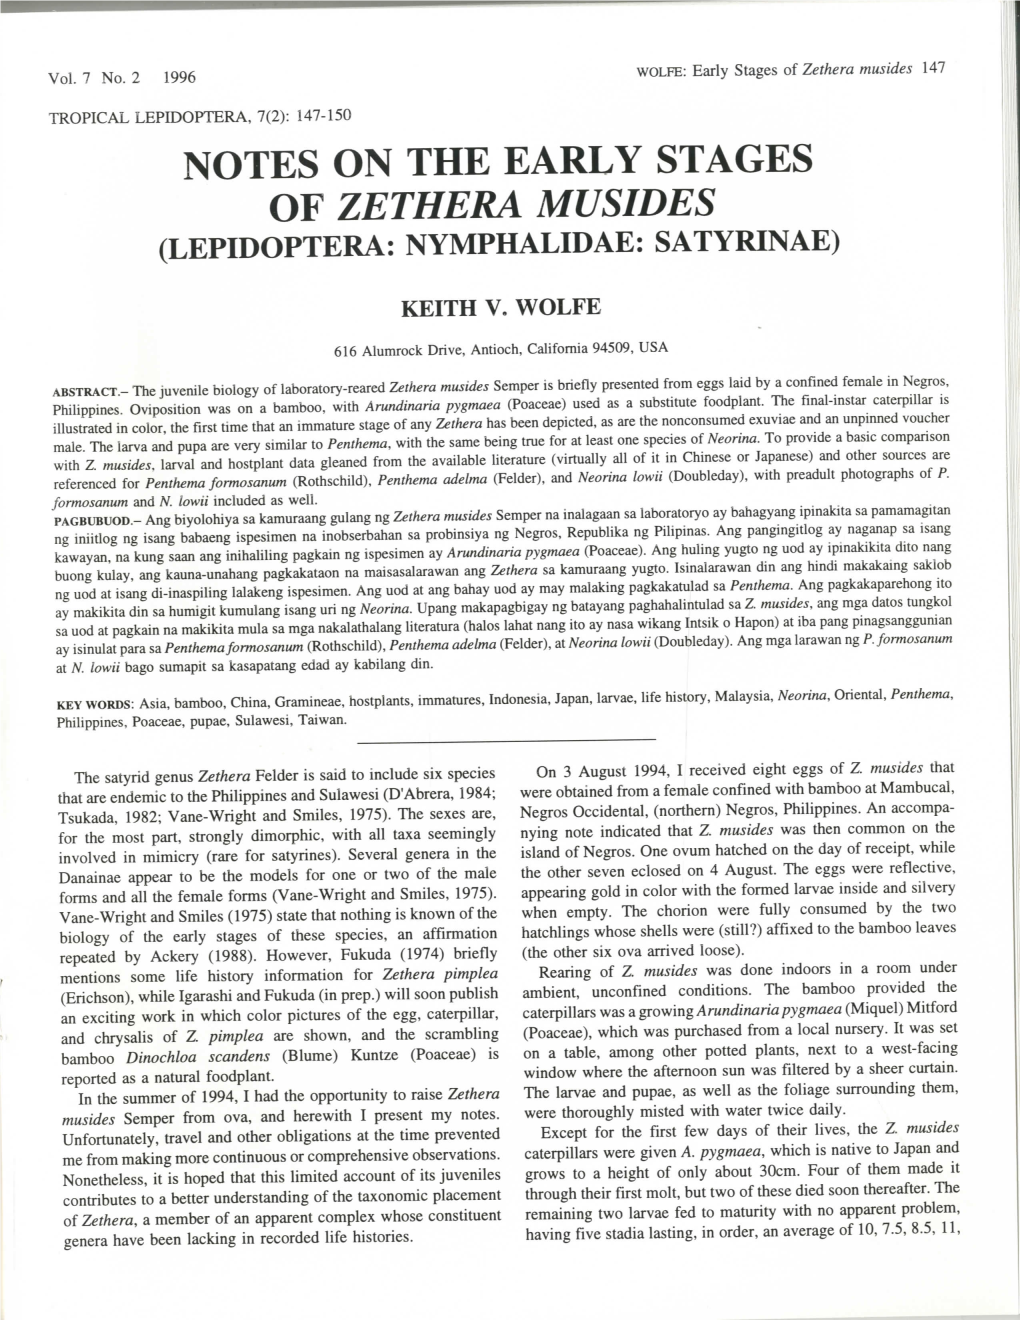 Notes on the Early Stages of Zethera Musides (Lepidoptera: Nymphalidae: Satyrinae)